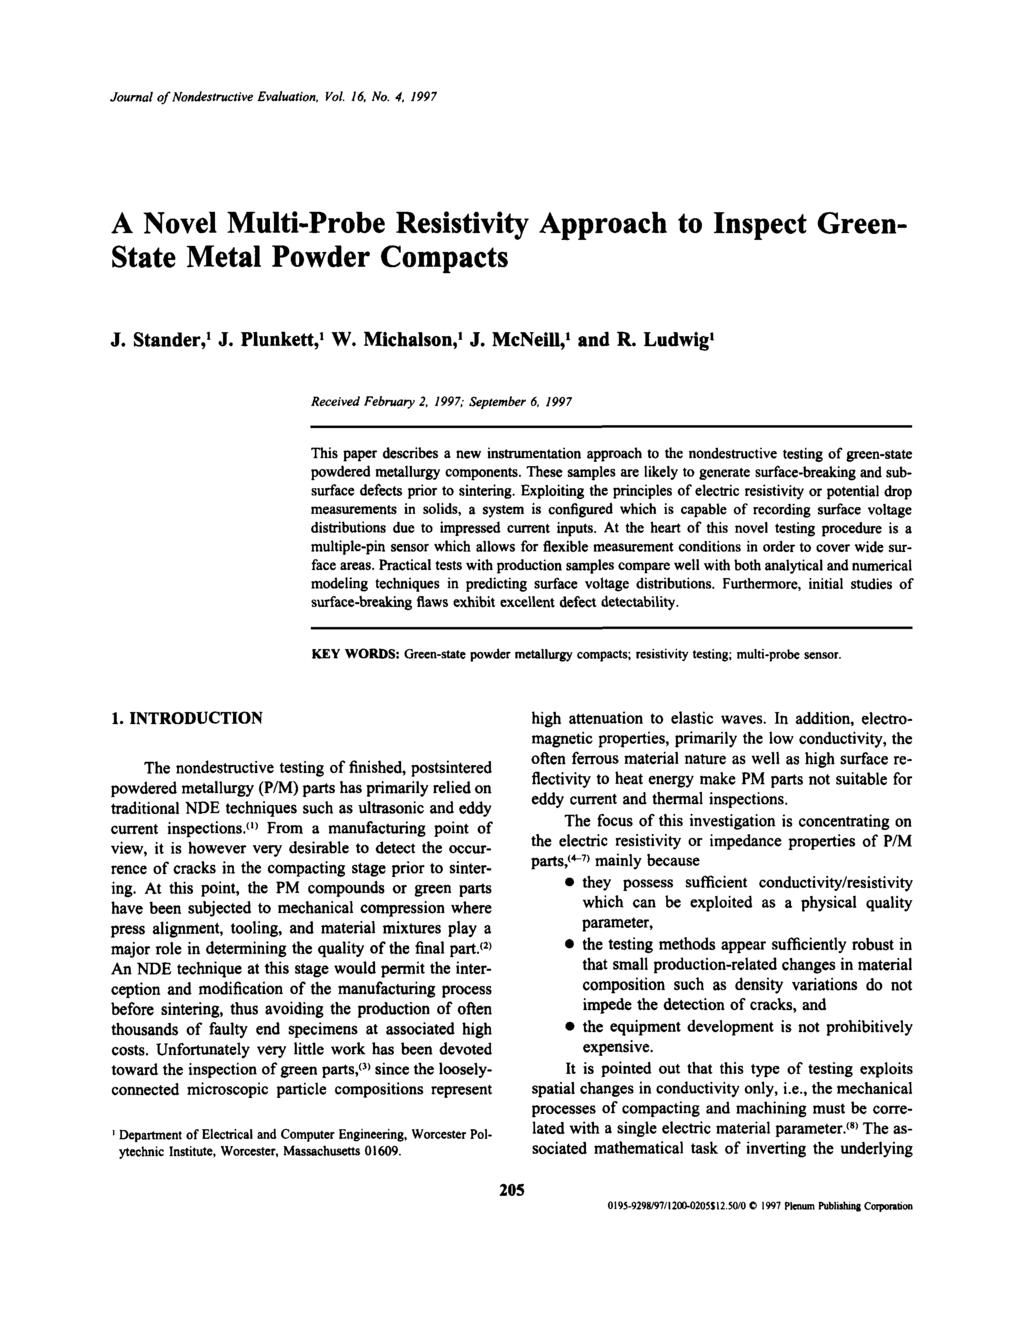 Journal of Nondestructive Evaluation, Vol. 16, No. 4. 1997 A Novel Multi-Probe Resistivity Approach to Inspect Green- State Metal Powder Compacts J. Stander, 1 J. Plunkett, 1 W. Michalson, 1 J.